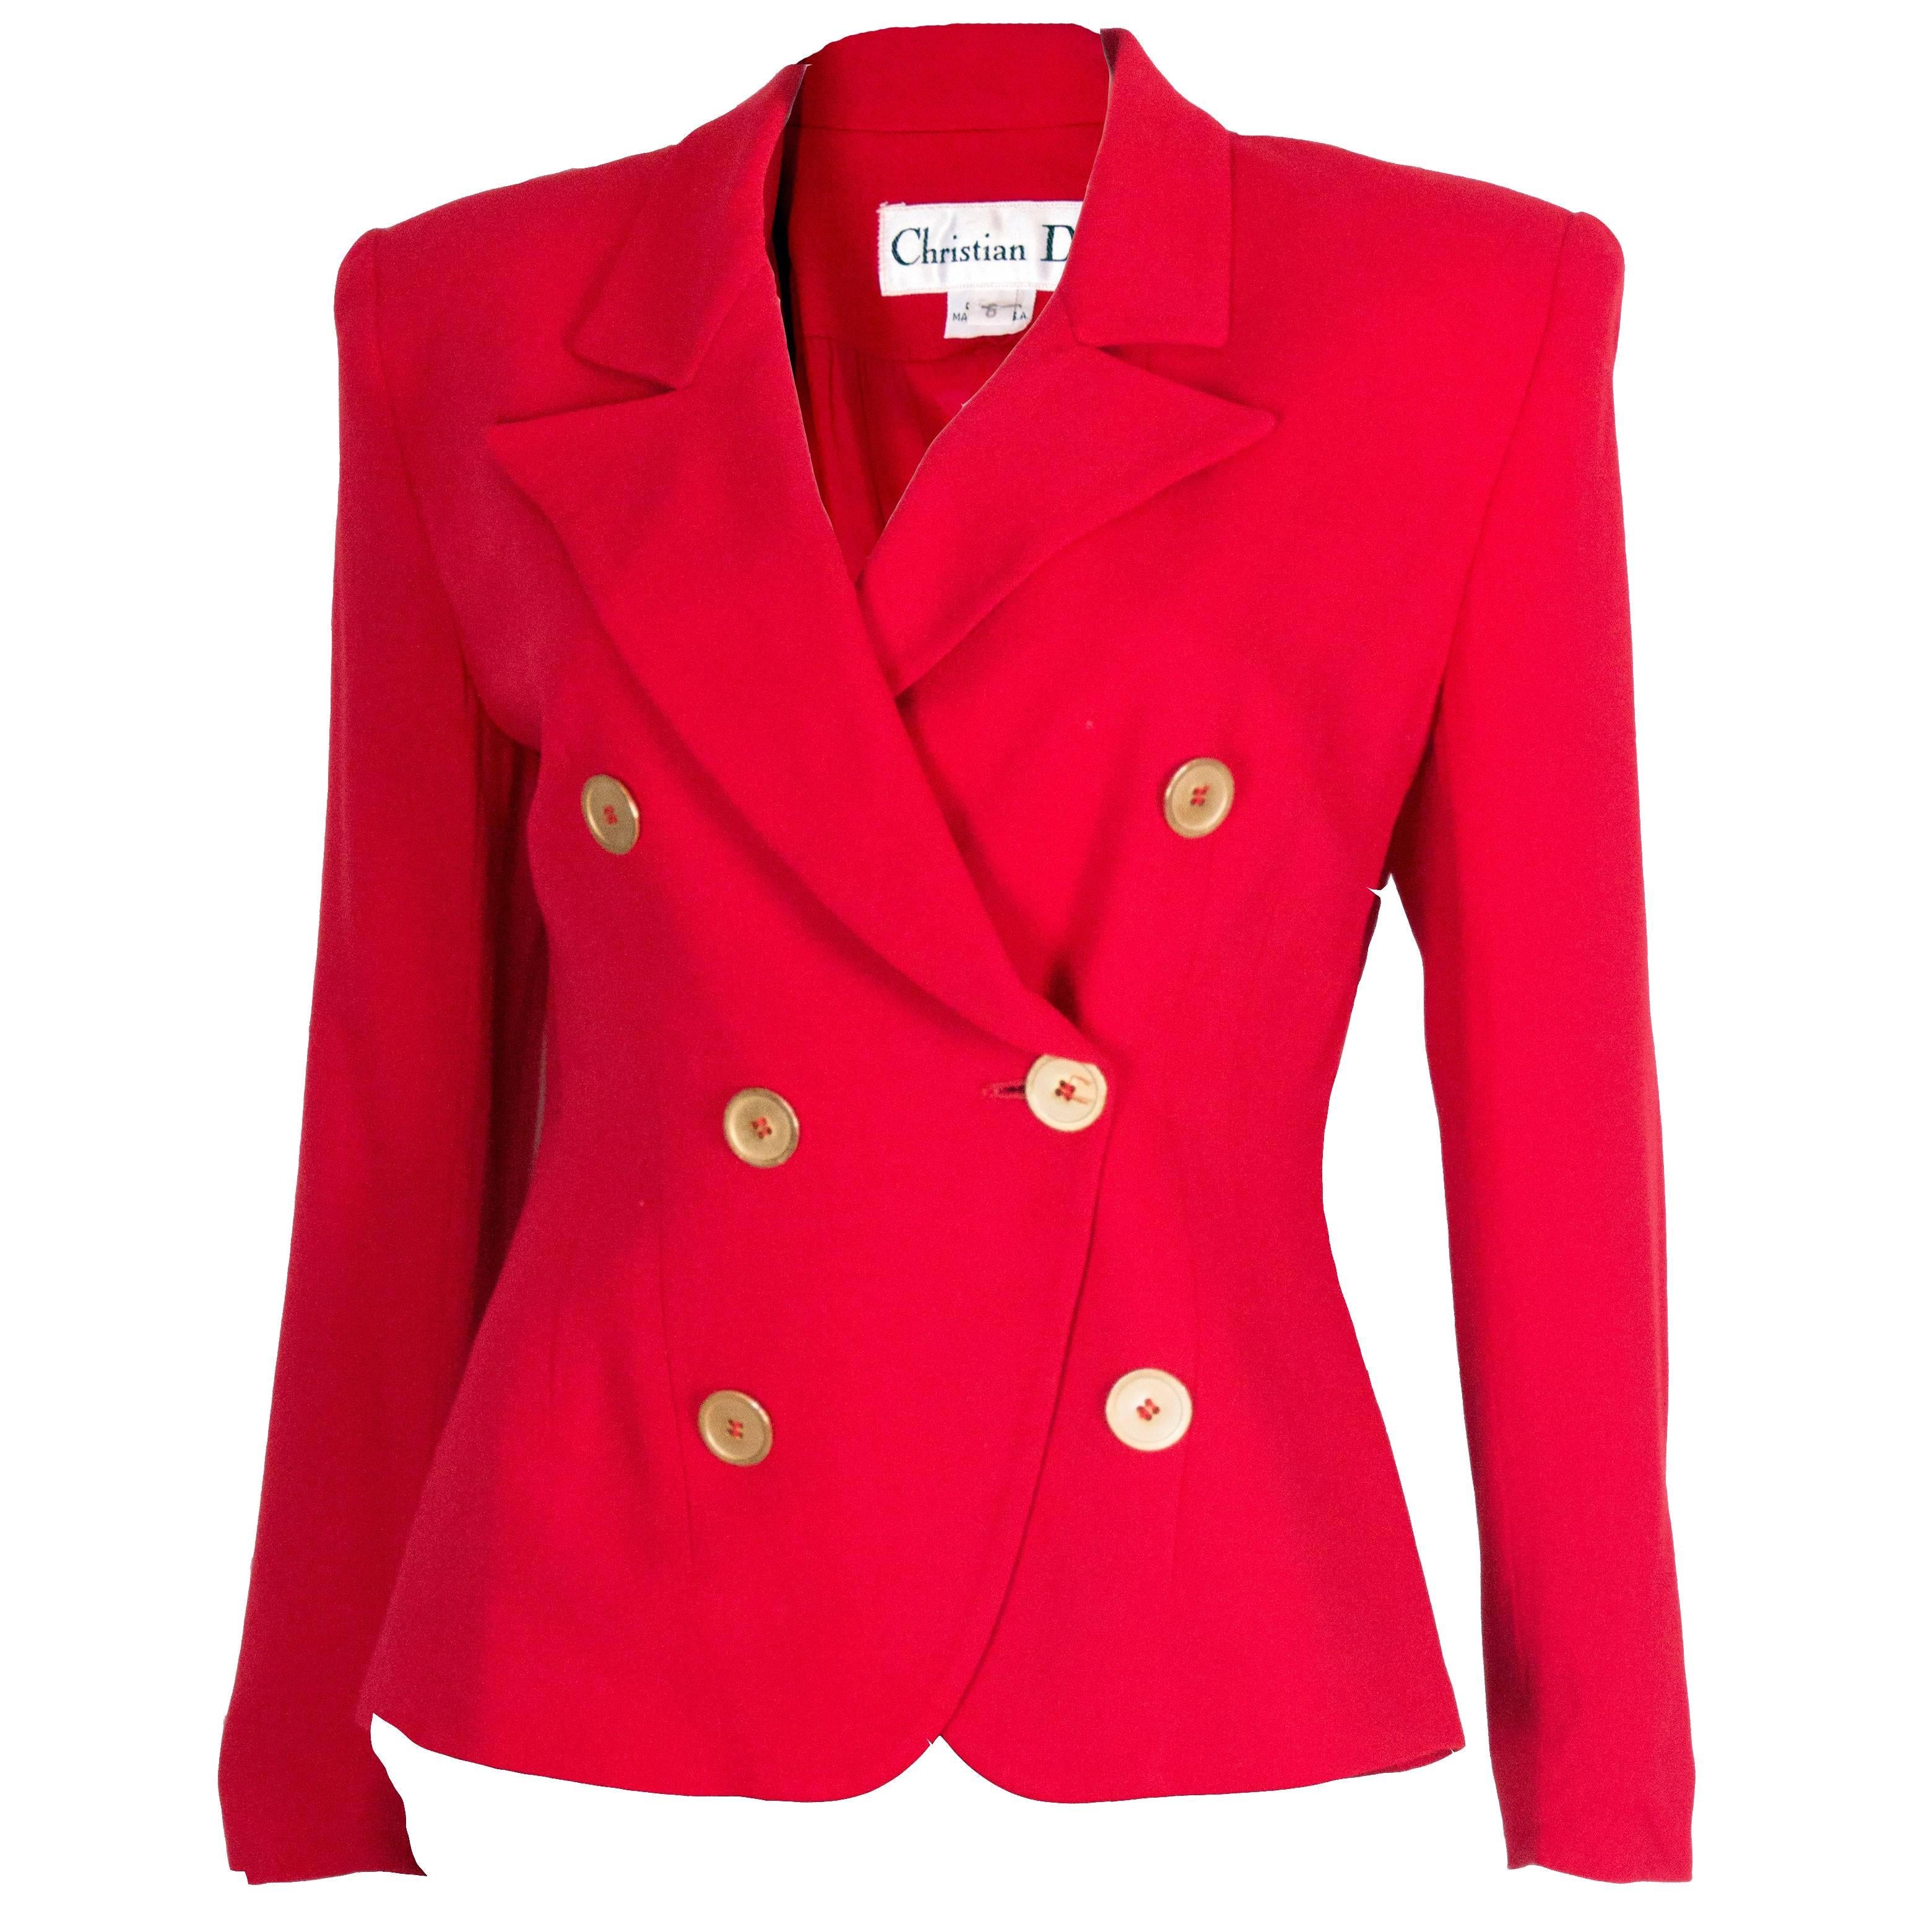 Christian Dior Red Jacket